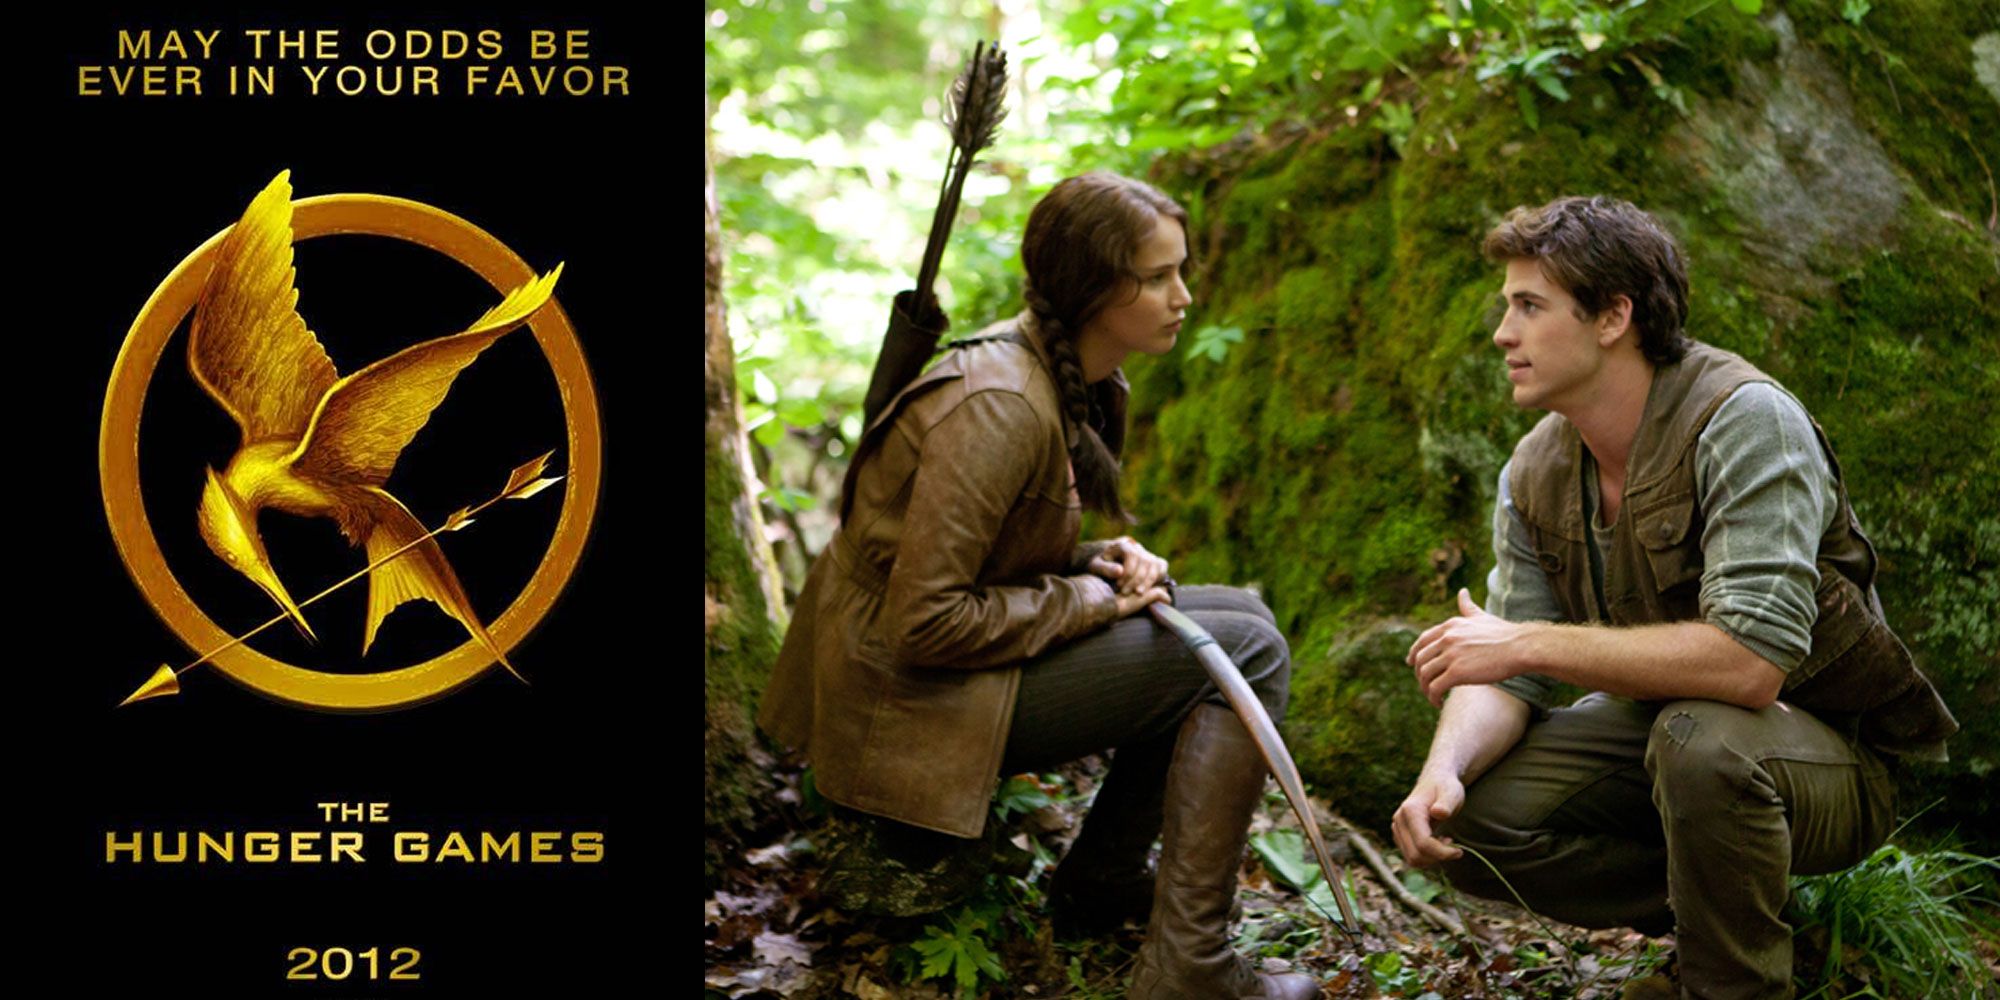 The Hunger Games 2012 Poster